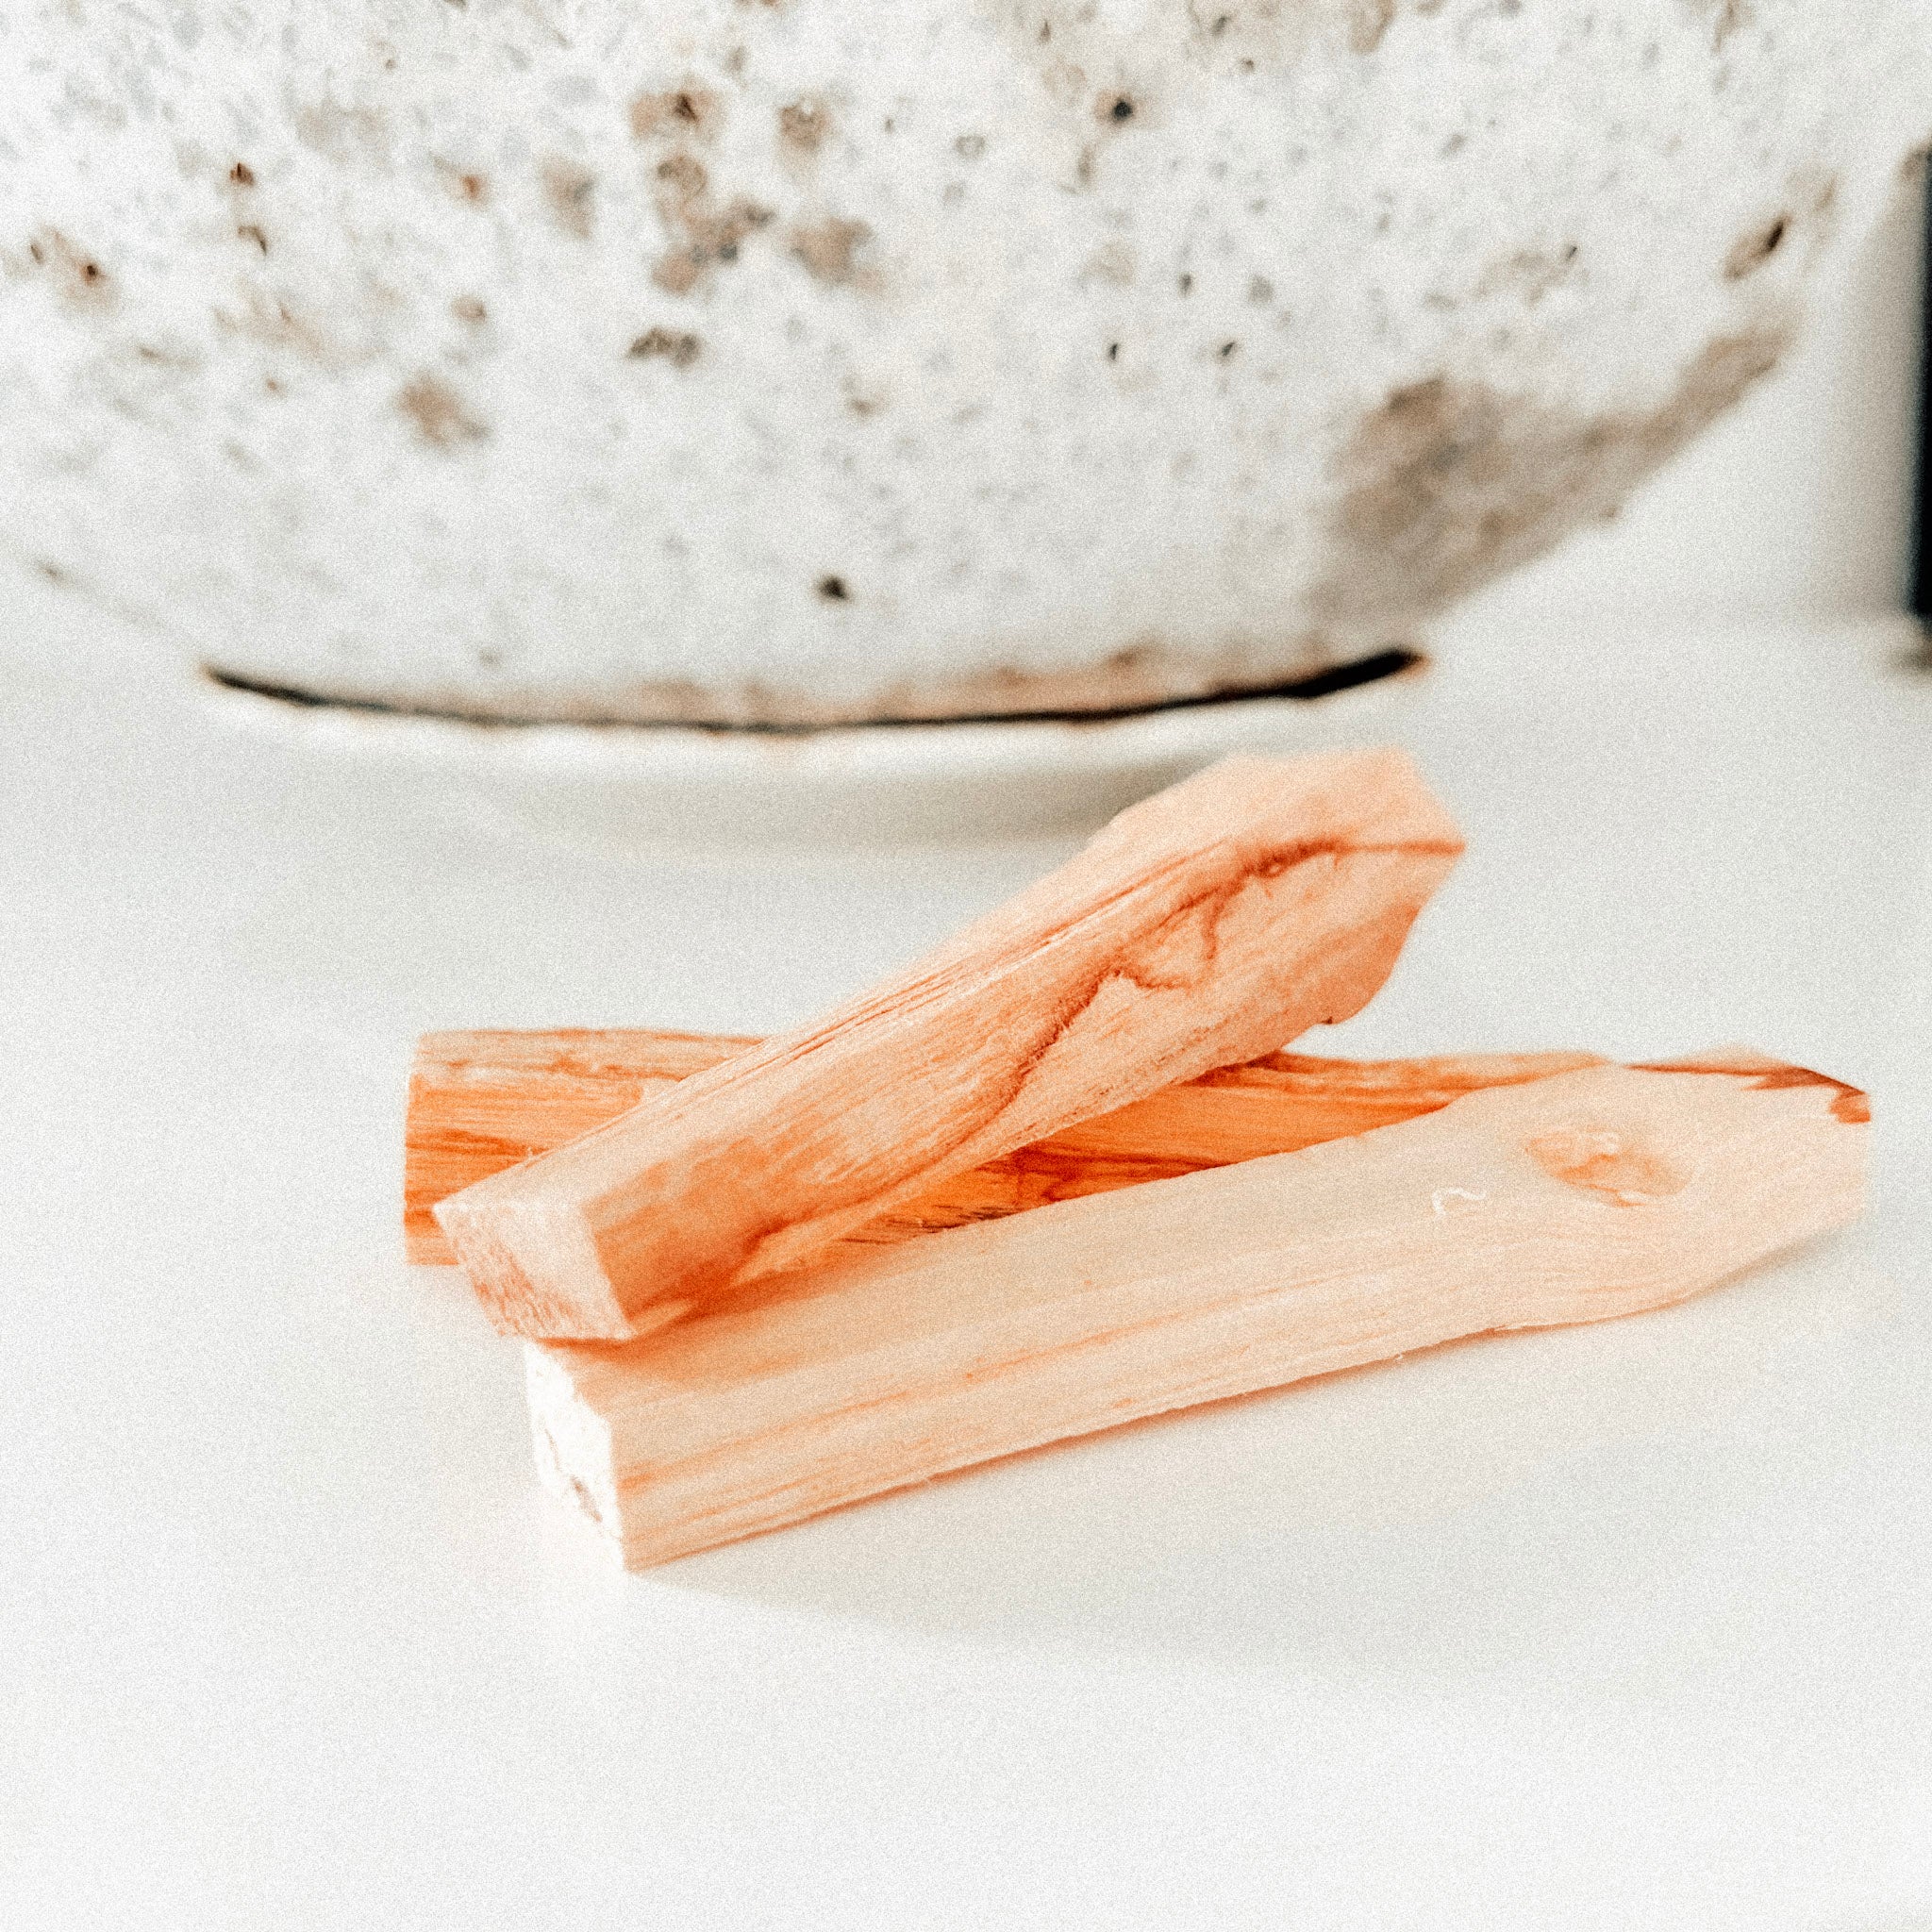 image of palo santo pieces of wood on white surface